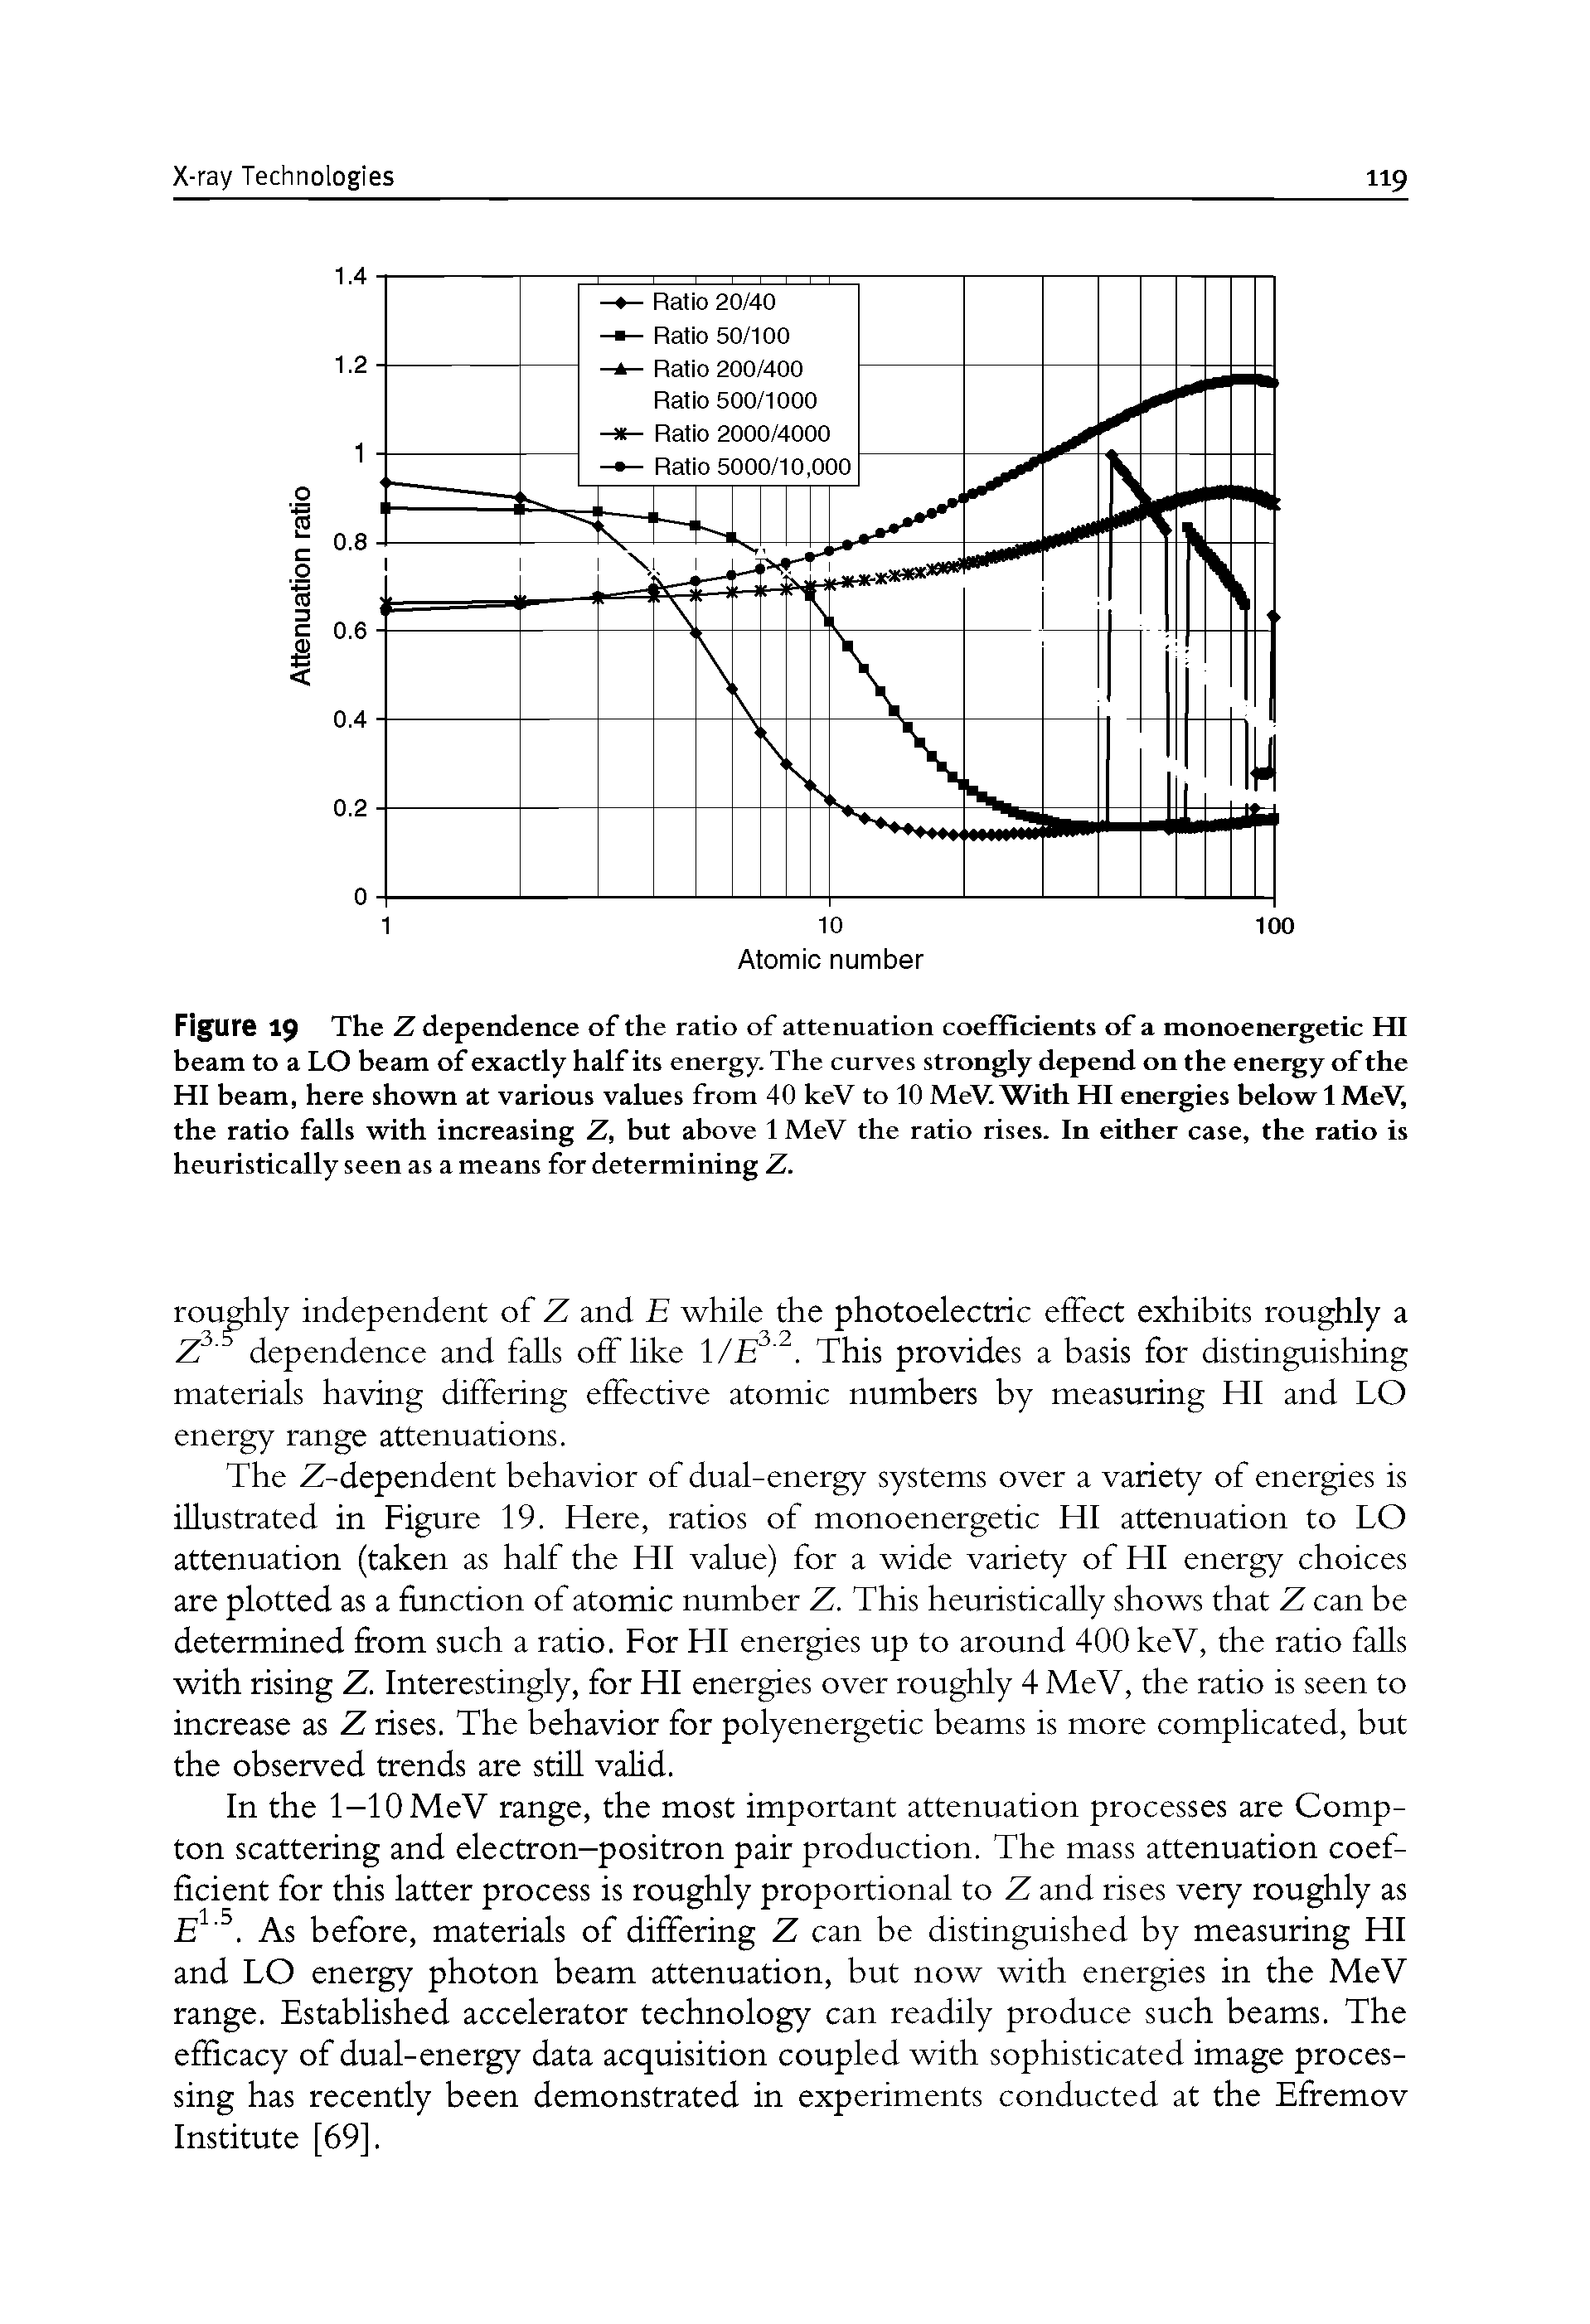 Figure 19 The Z dependence of the ratio of attenuation coefficients of a monoenergetic HI beam to a LO beam of exactly half its energy. The curves strongly depend on the energy of the HI beam, here shown at various values from 40 keV to 10 MeV. With HI energies below 1 MeV, the ratio falls with increasing Z, but above 1 MeV the ratio rises. In either case, the ratio is heuristically seen as a means for determining Z.